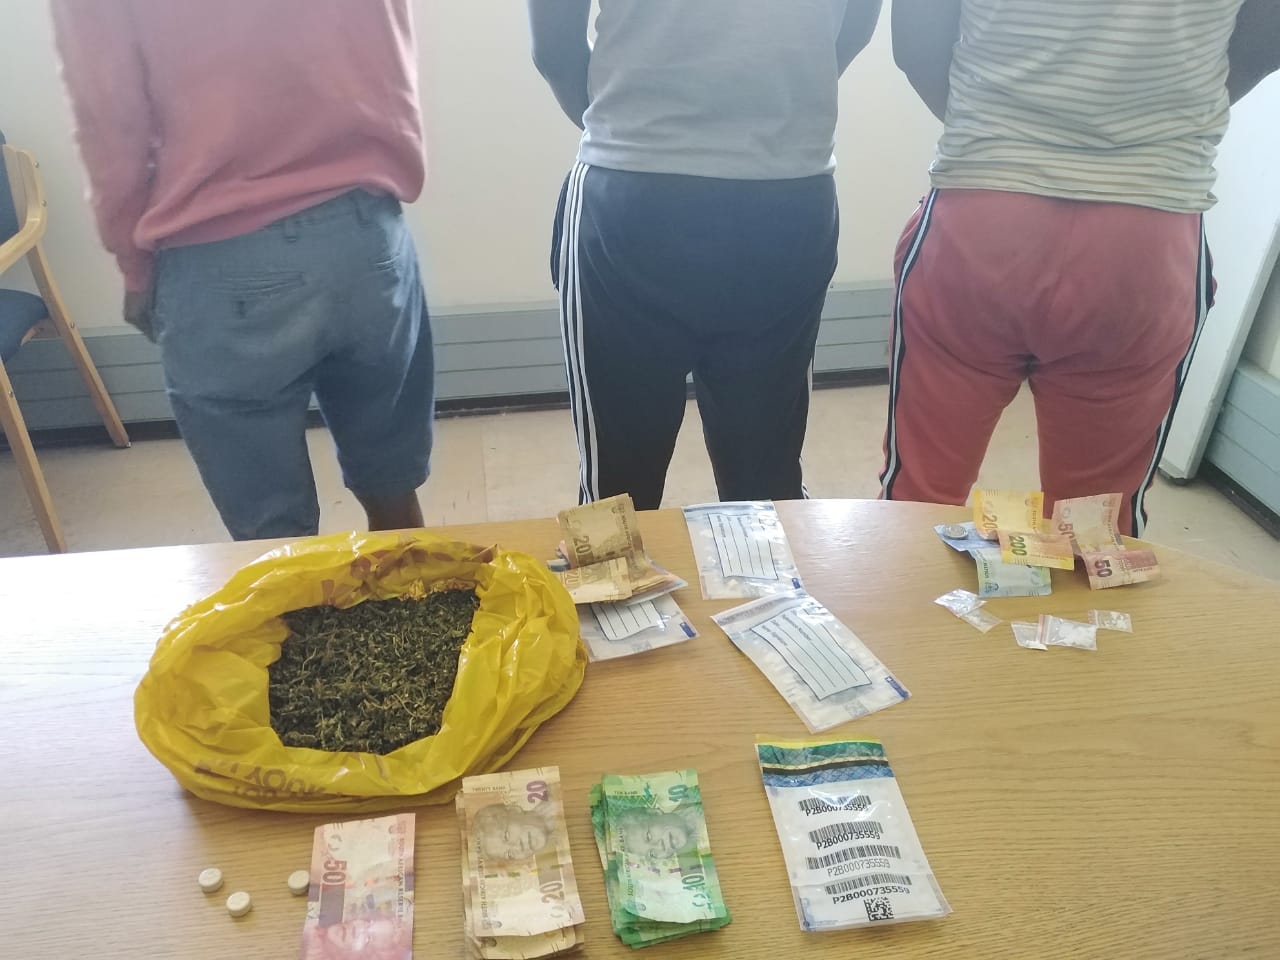 Alleged drug dealers removed from the streets of Thabong